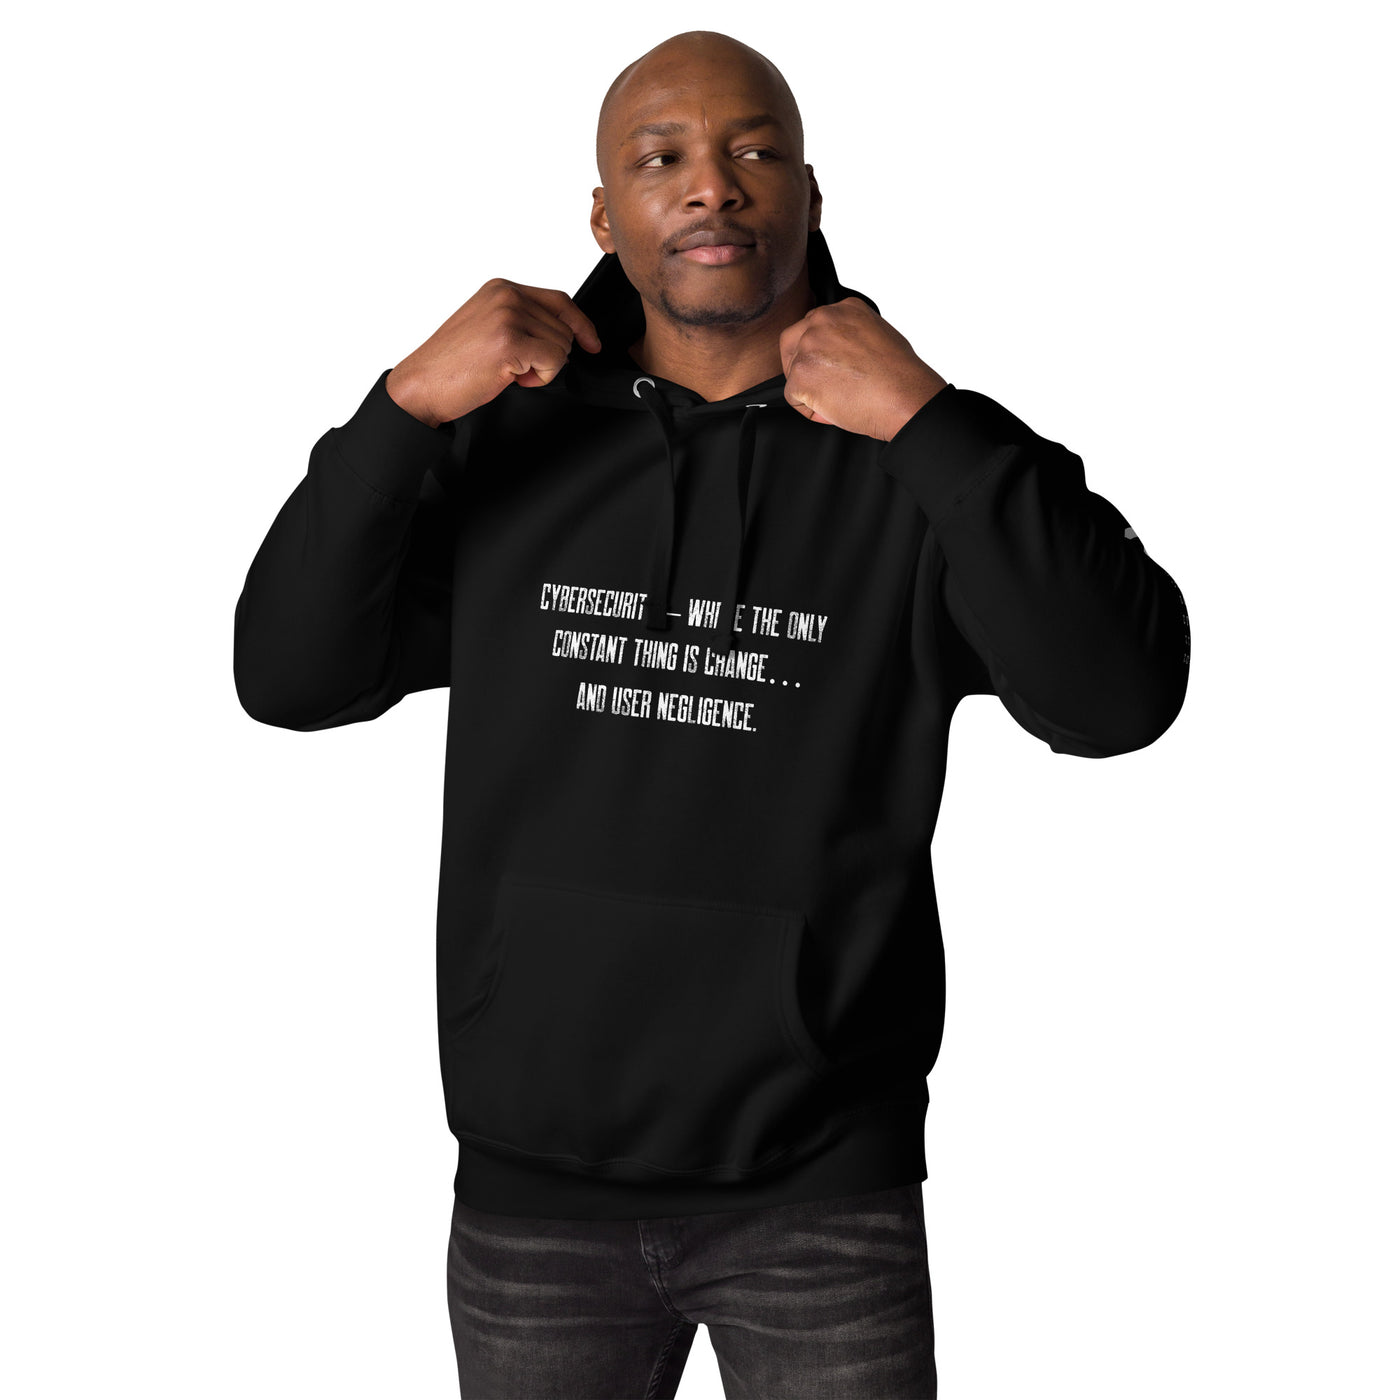 Cybersecurity where the only constant thing is change and user negligence - Unisex Hoodie